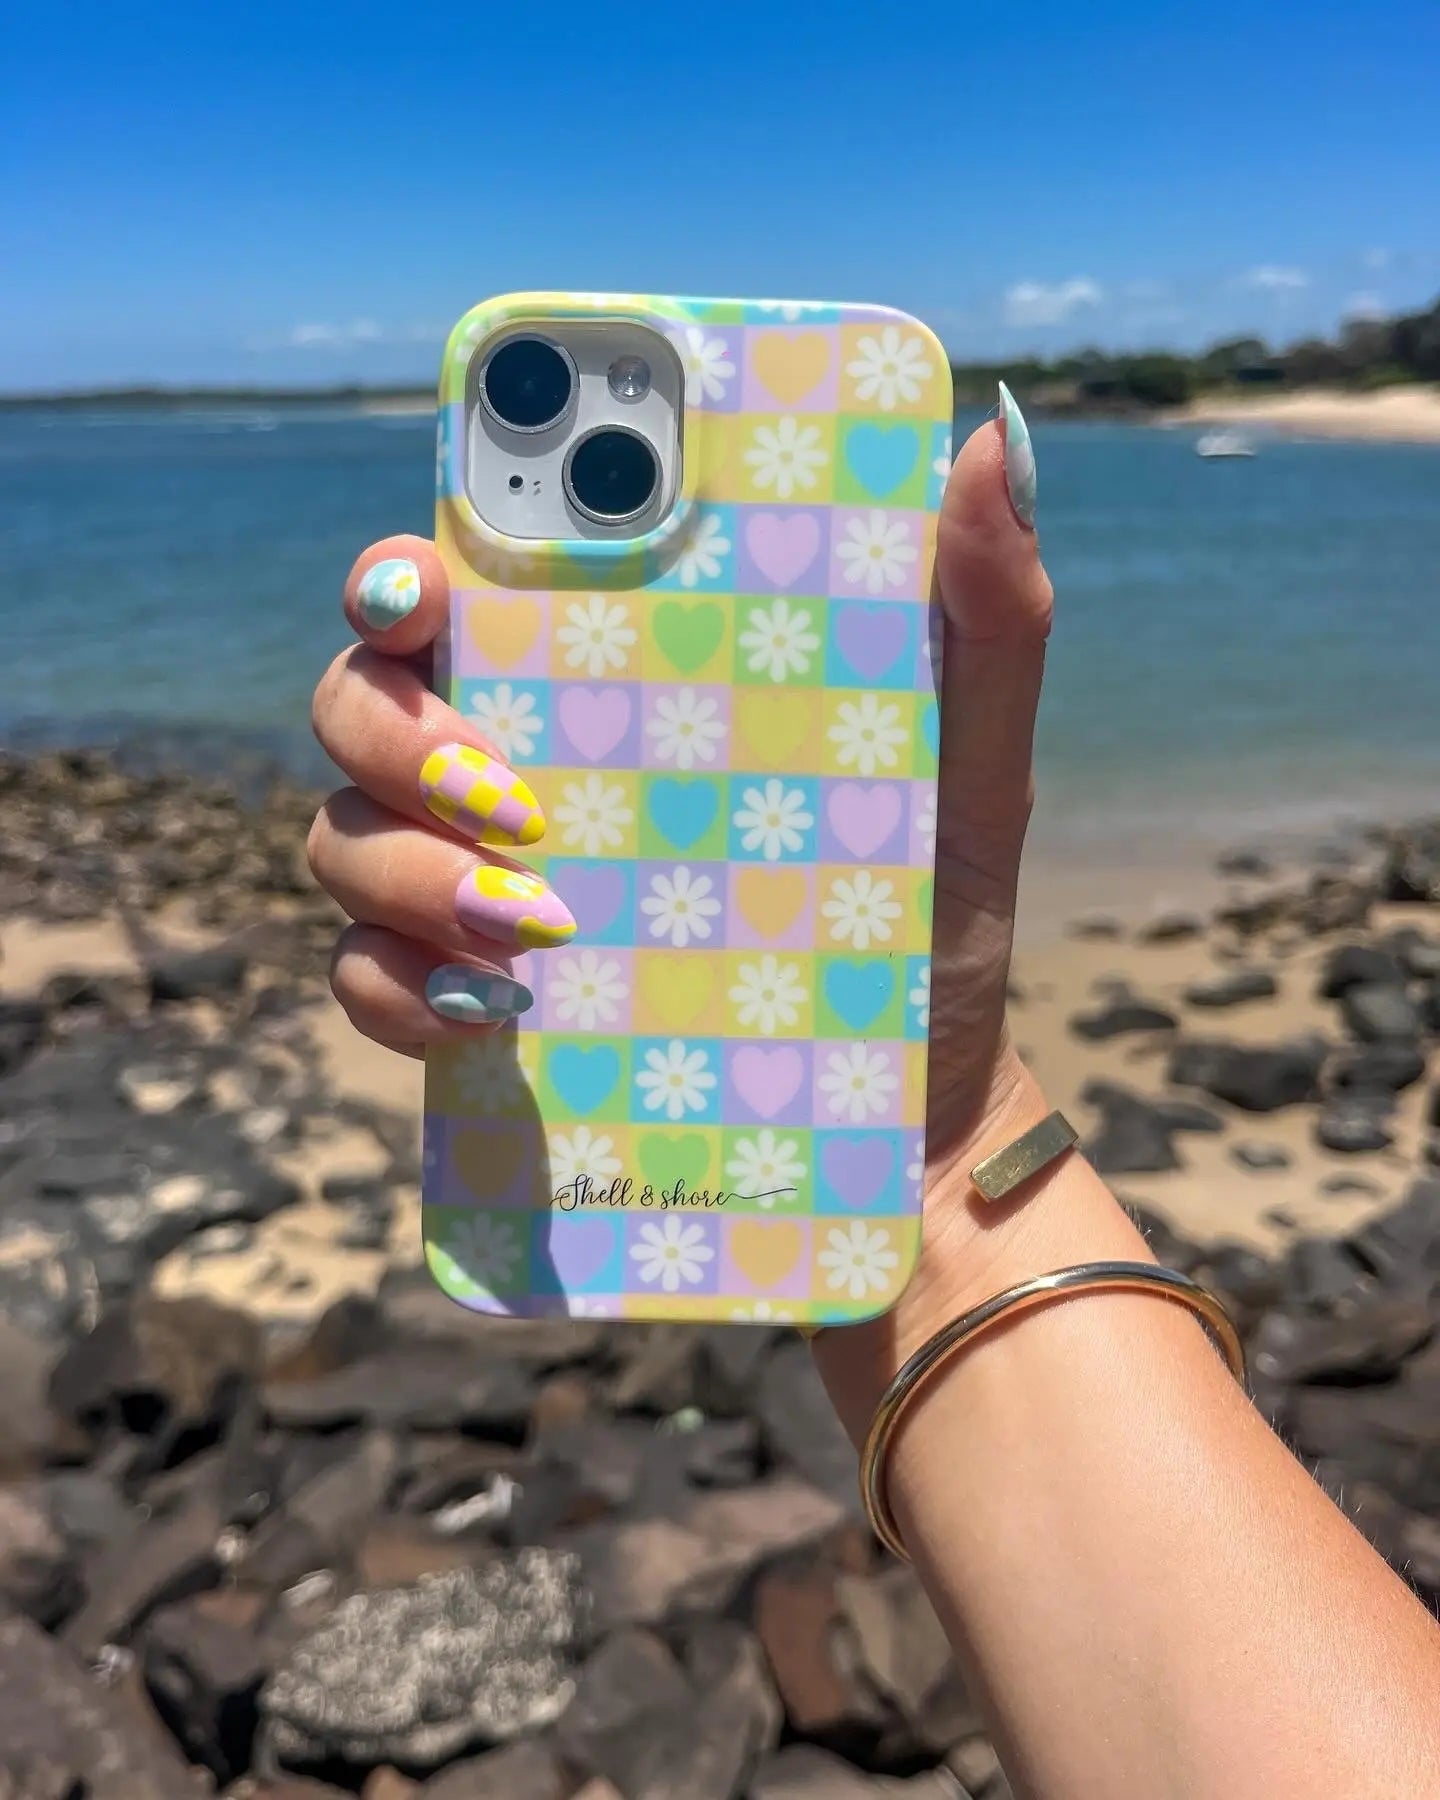 Petal Patch iPhone Case Shell And Shore